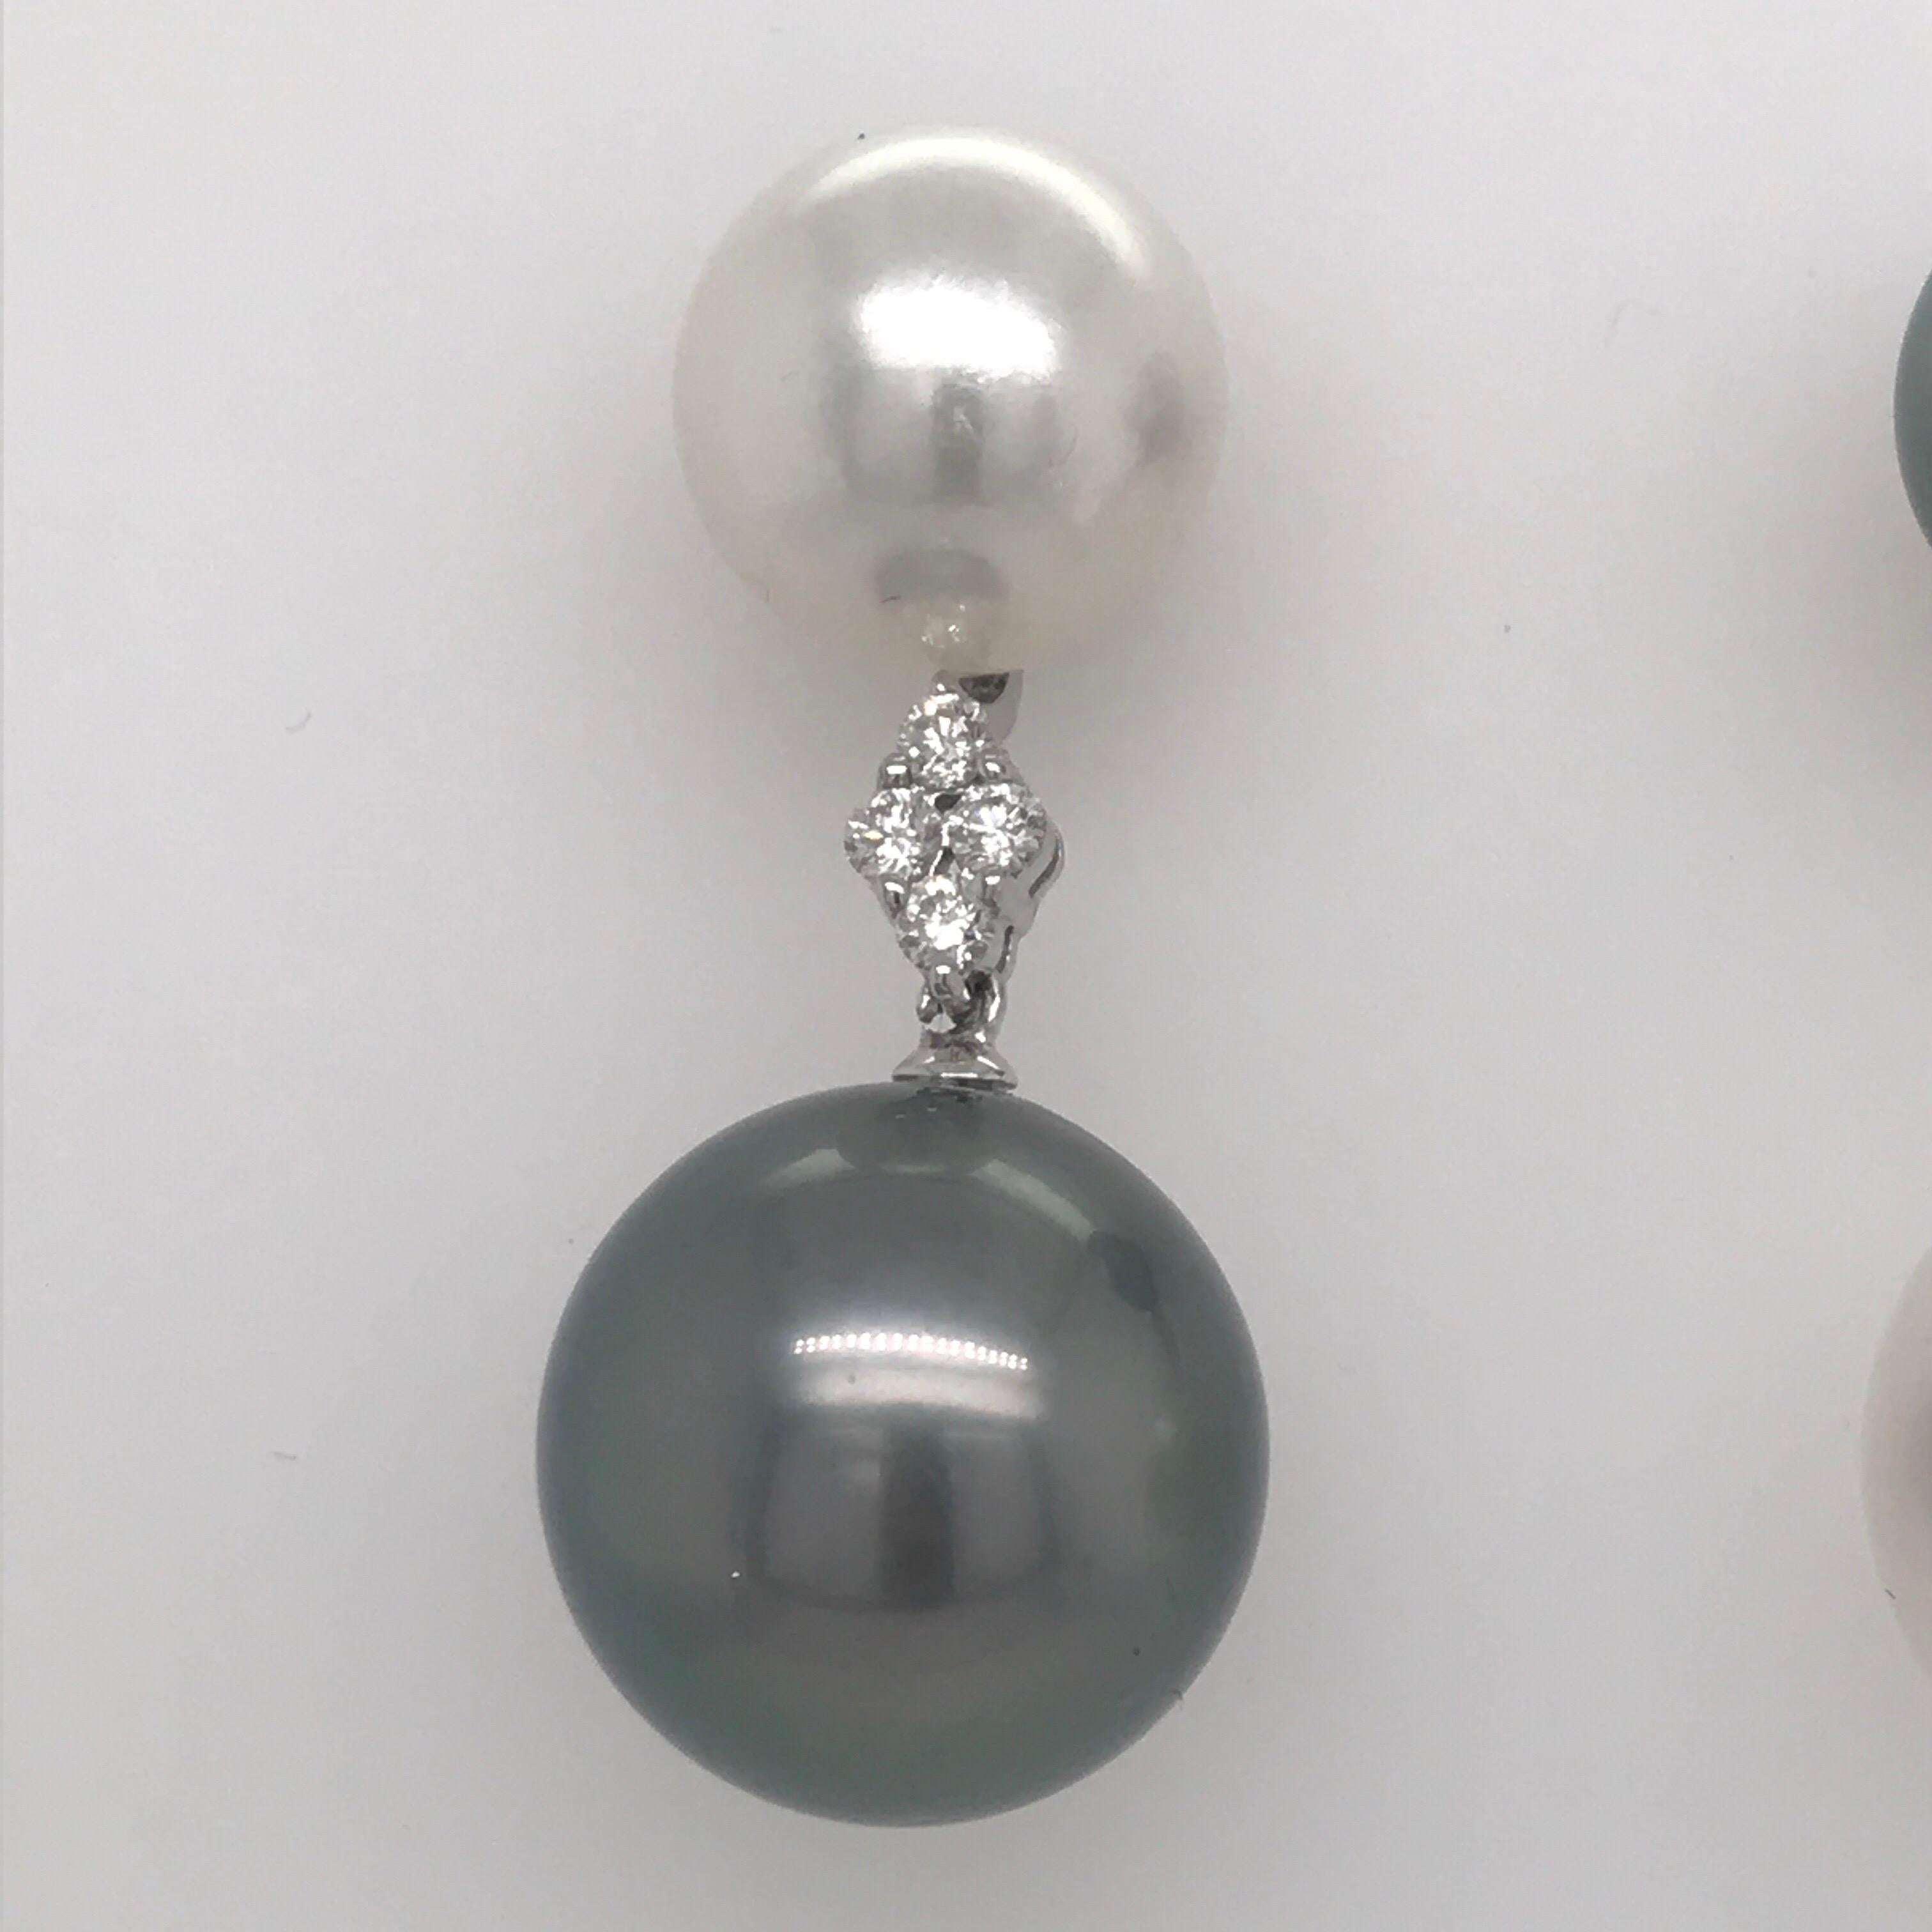 18K White gold drop earrings featuring alternating white South Sea pearls and grey tone Tahitian pearl with 4 round brilliants weighing 0.32 carats. 
Color G-H
Clarity SI
Pearls measure 12-14 mm